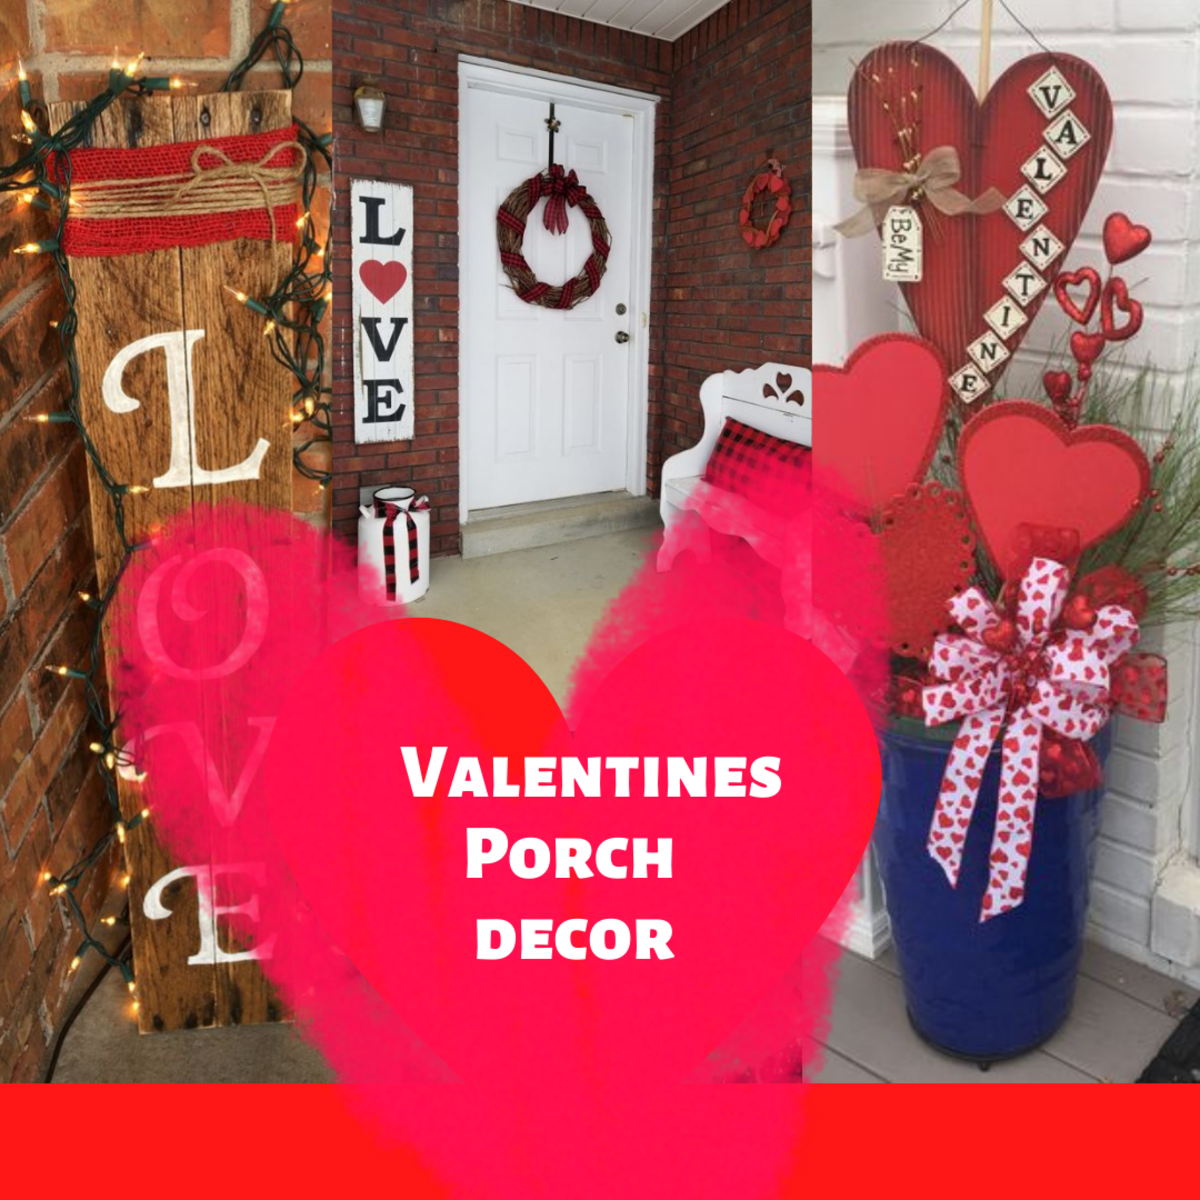 50+ Romantic Valentines Day Porch Decor Ideas to Welcome Love to Your Home